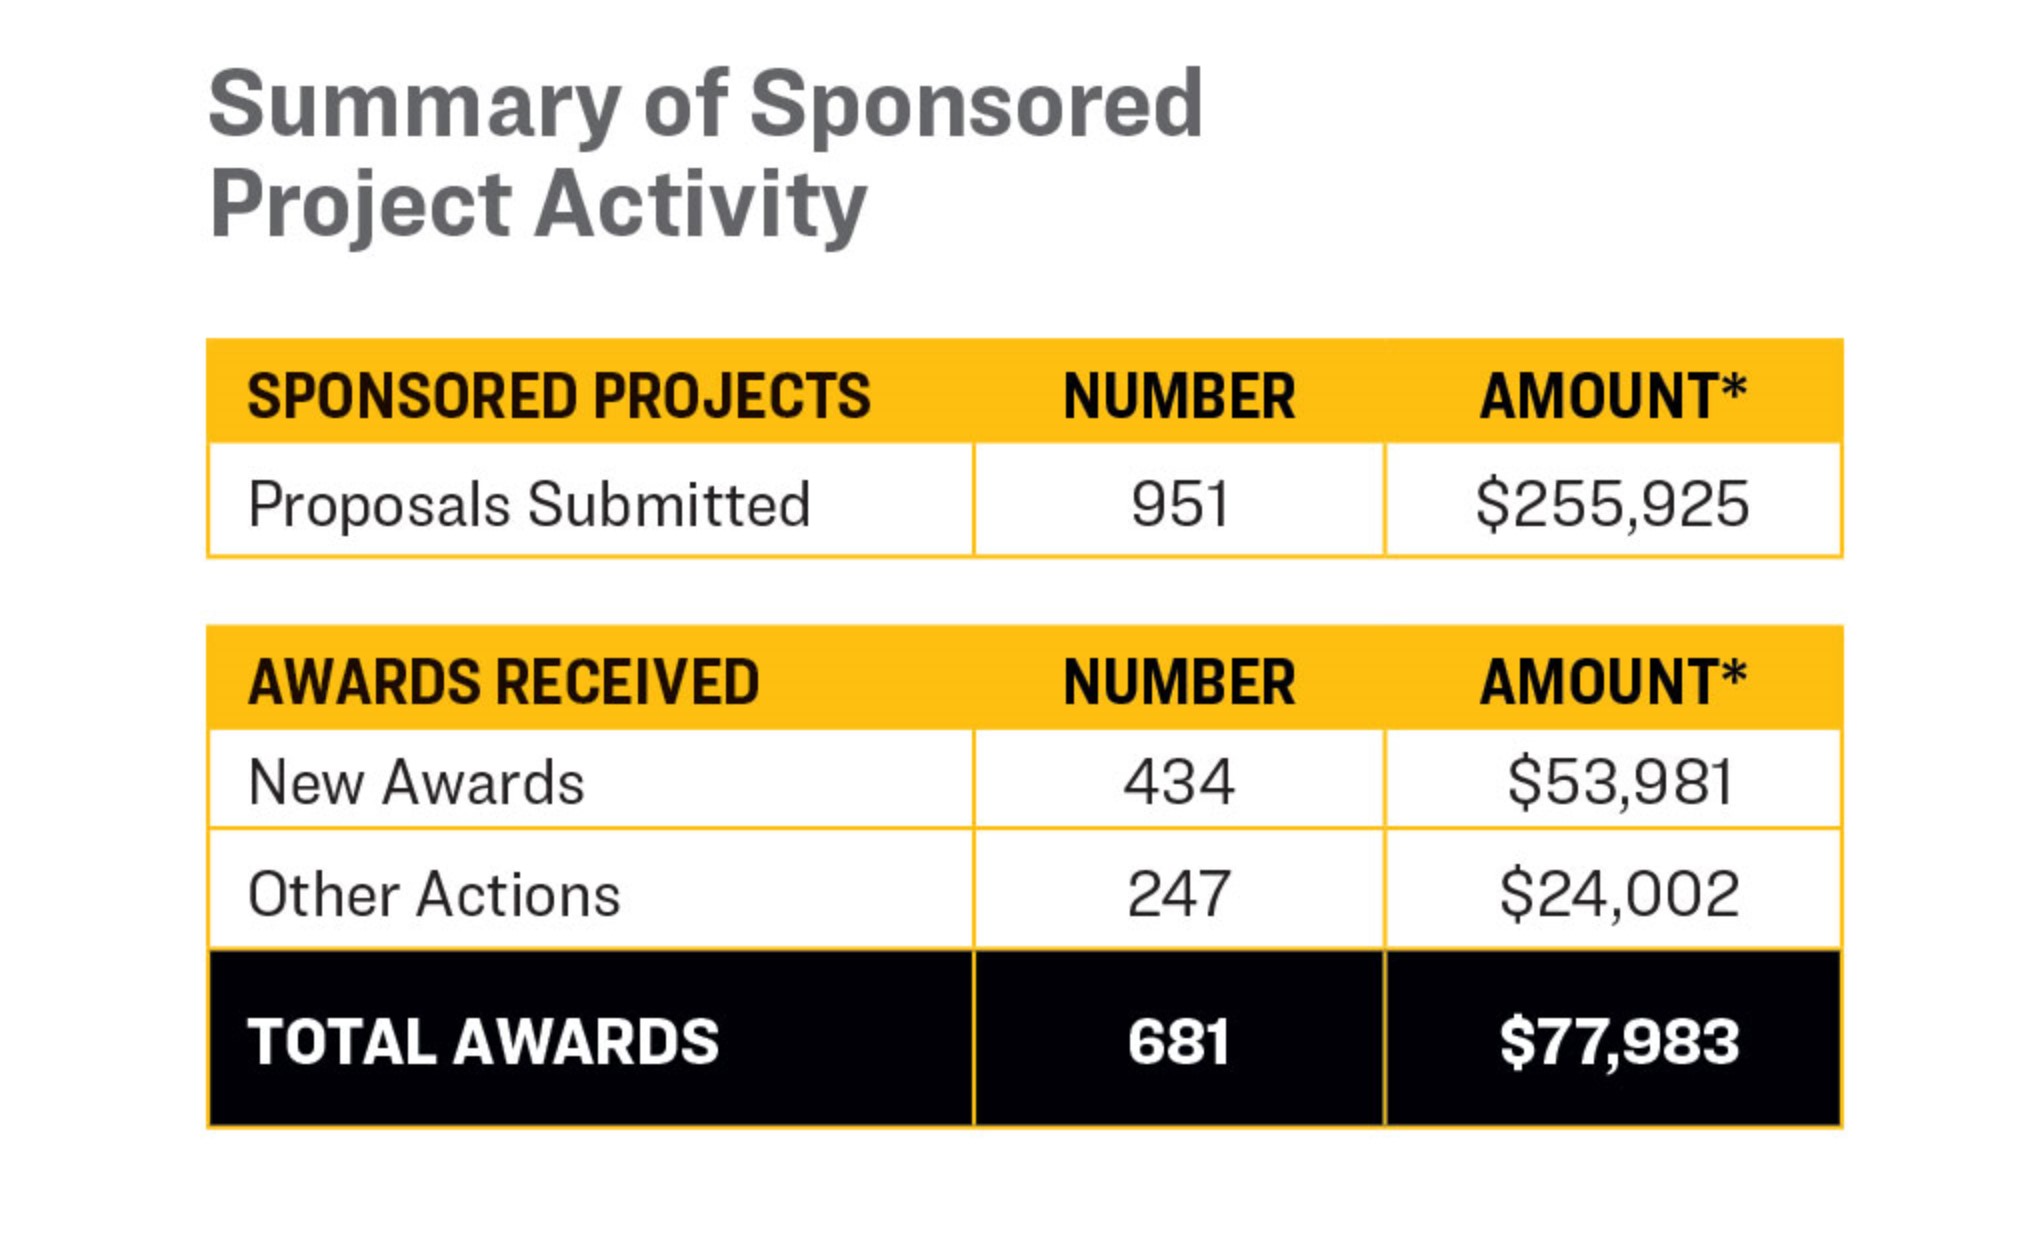 A table representing a Summary of Sponsored Project Activity for the 2018 fiscal year. A total 951 proposals amounting to $255,925 were submitted, resulting in 434 "New Awards" amounting to $53,981 and 247 "Other Actions" equaling $24,002. Bringing the total awards to 681 and an amount of $77,983. 